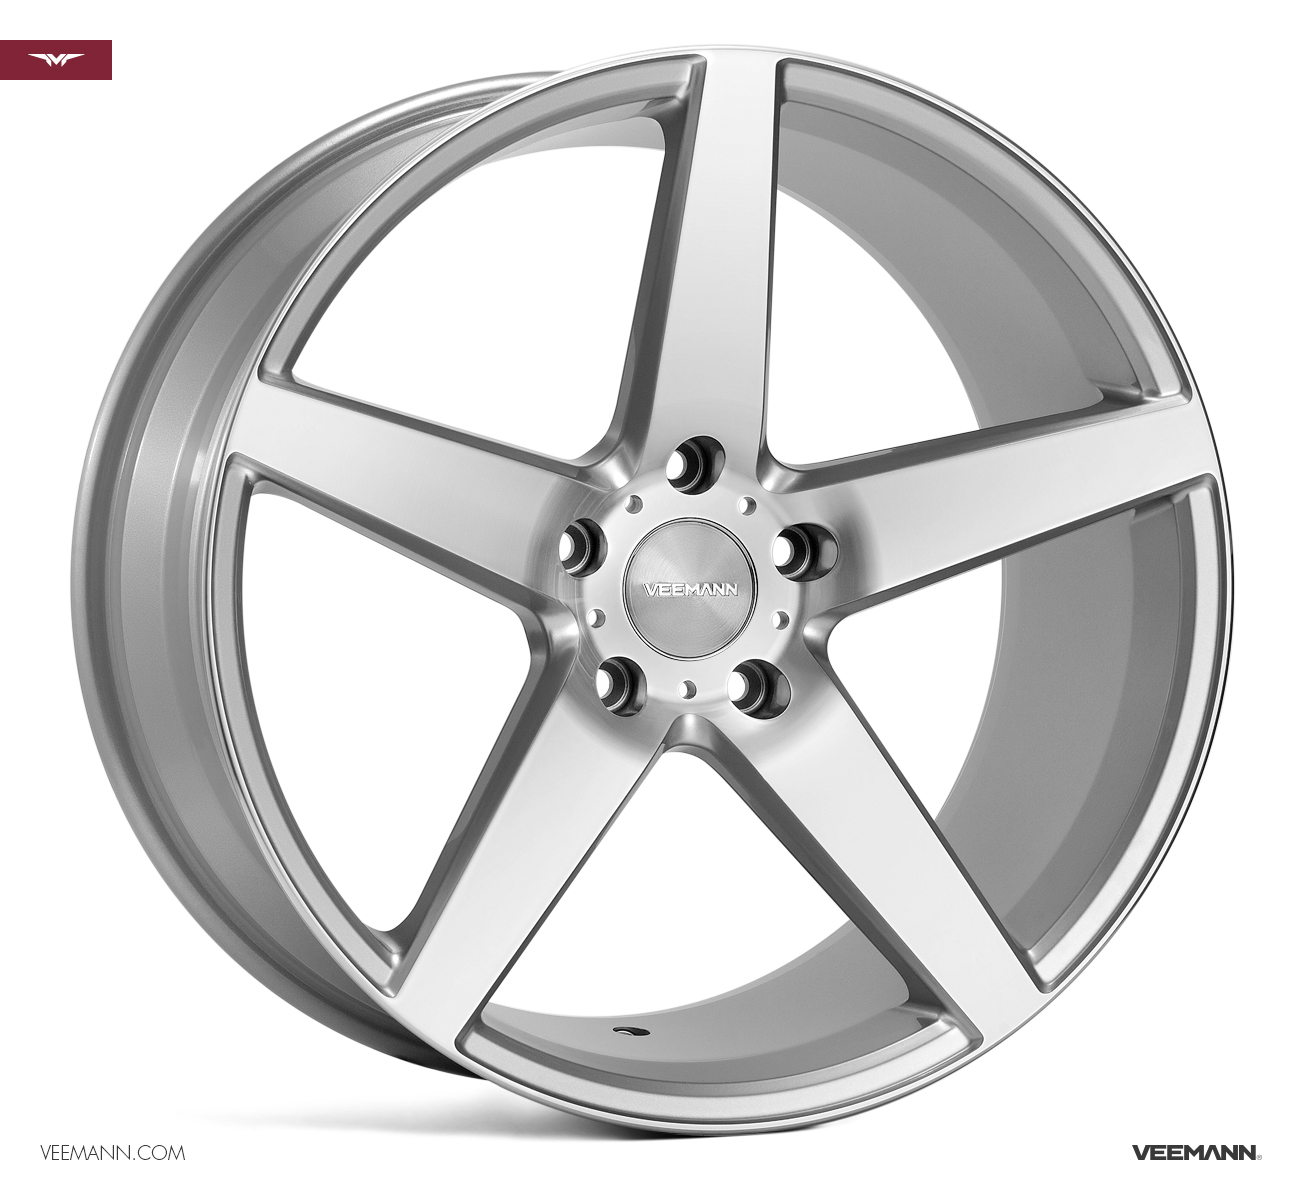 NEW 20" VEEMANN V-FS8 5 SPOKE CONCAVE ALLOY WHEELS IN SILVER WITH POLISHED FACE, WIDER 10" REARS